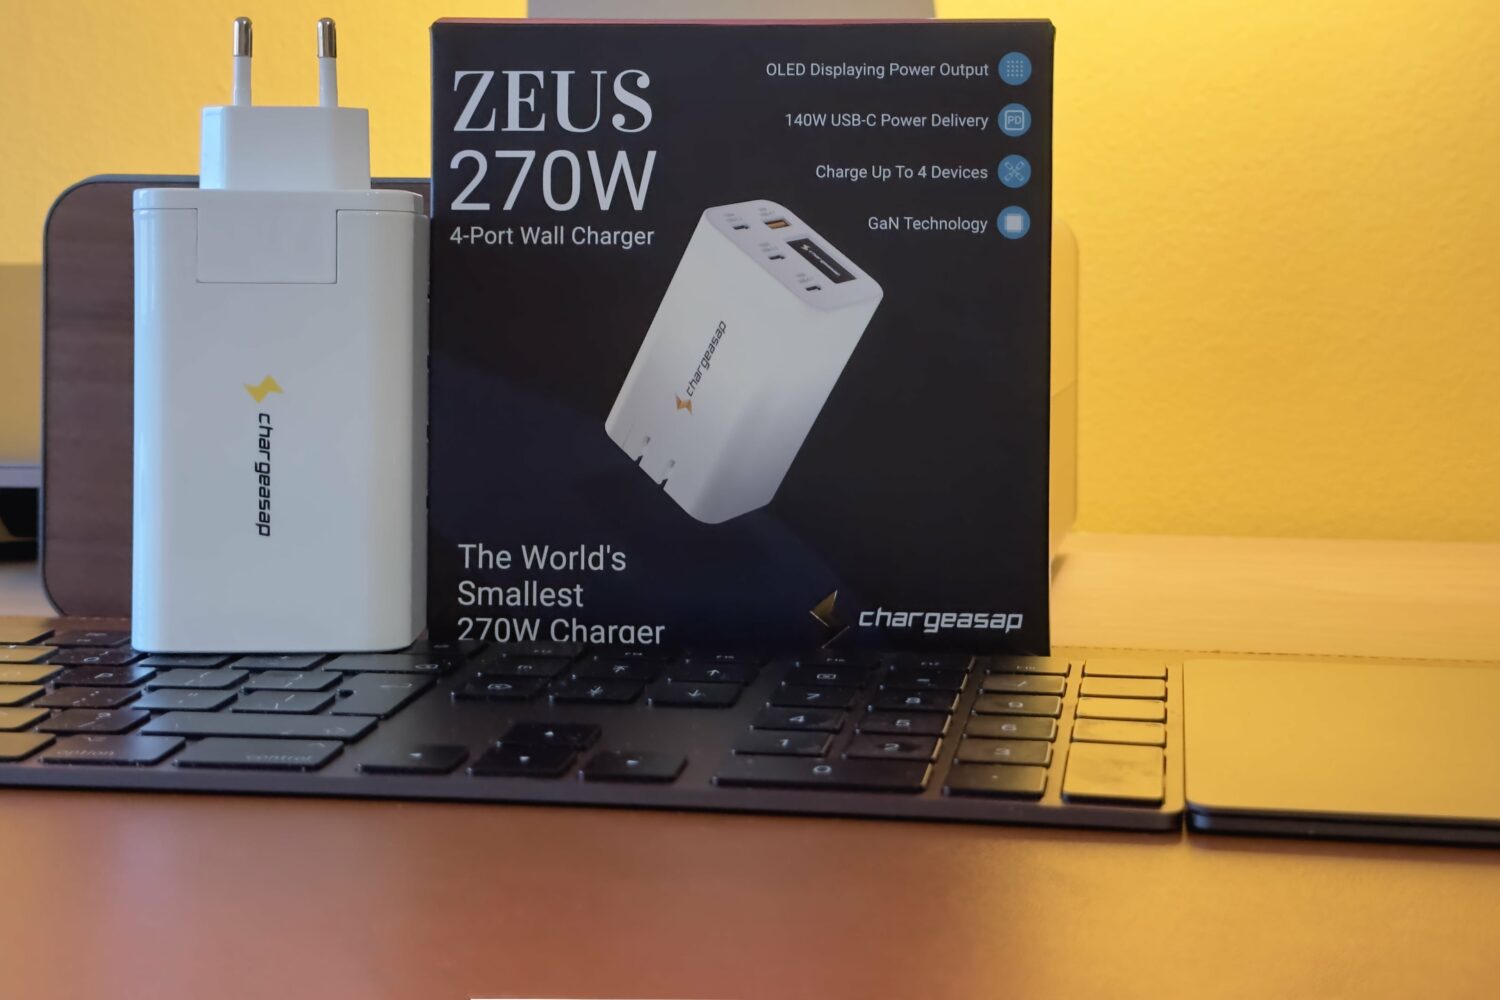 Packaging of the Chargeasap 150W Zeus power adapter on a desk with Apple gear